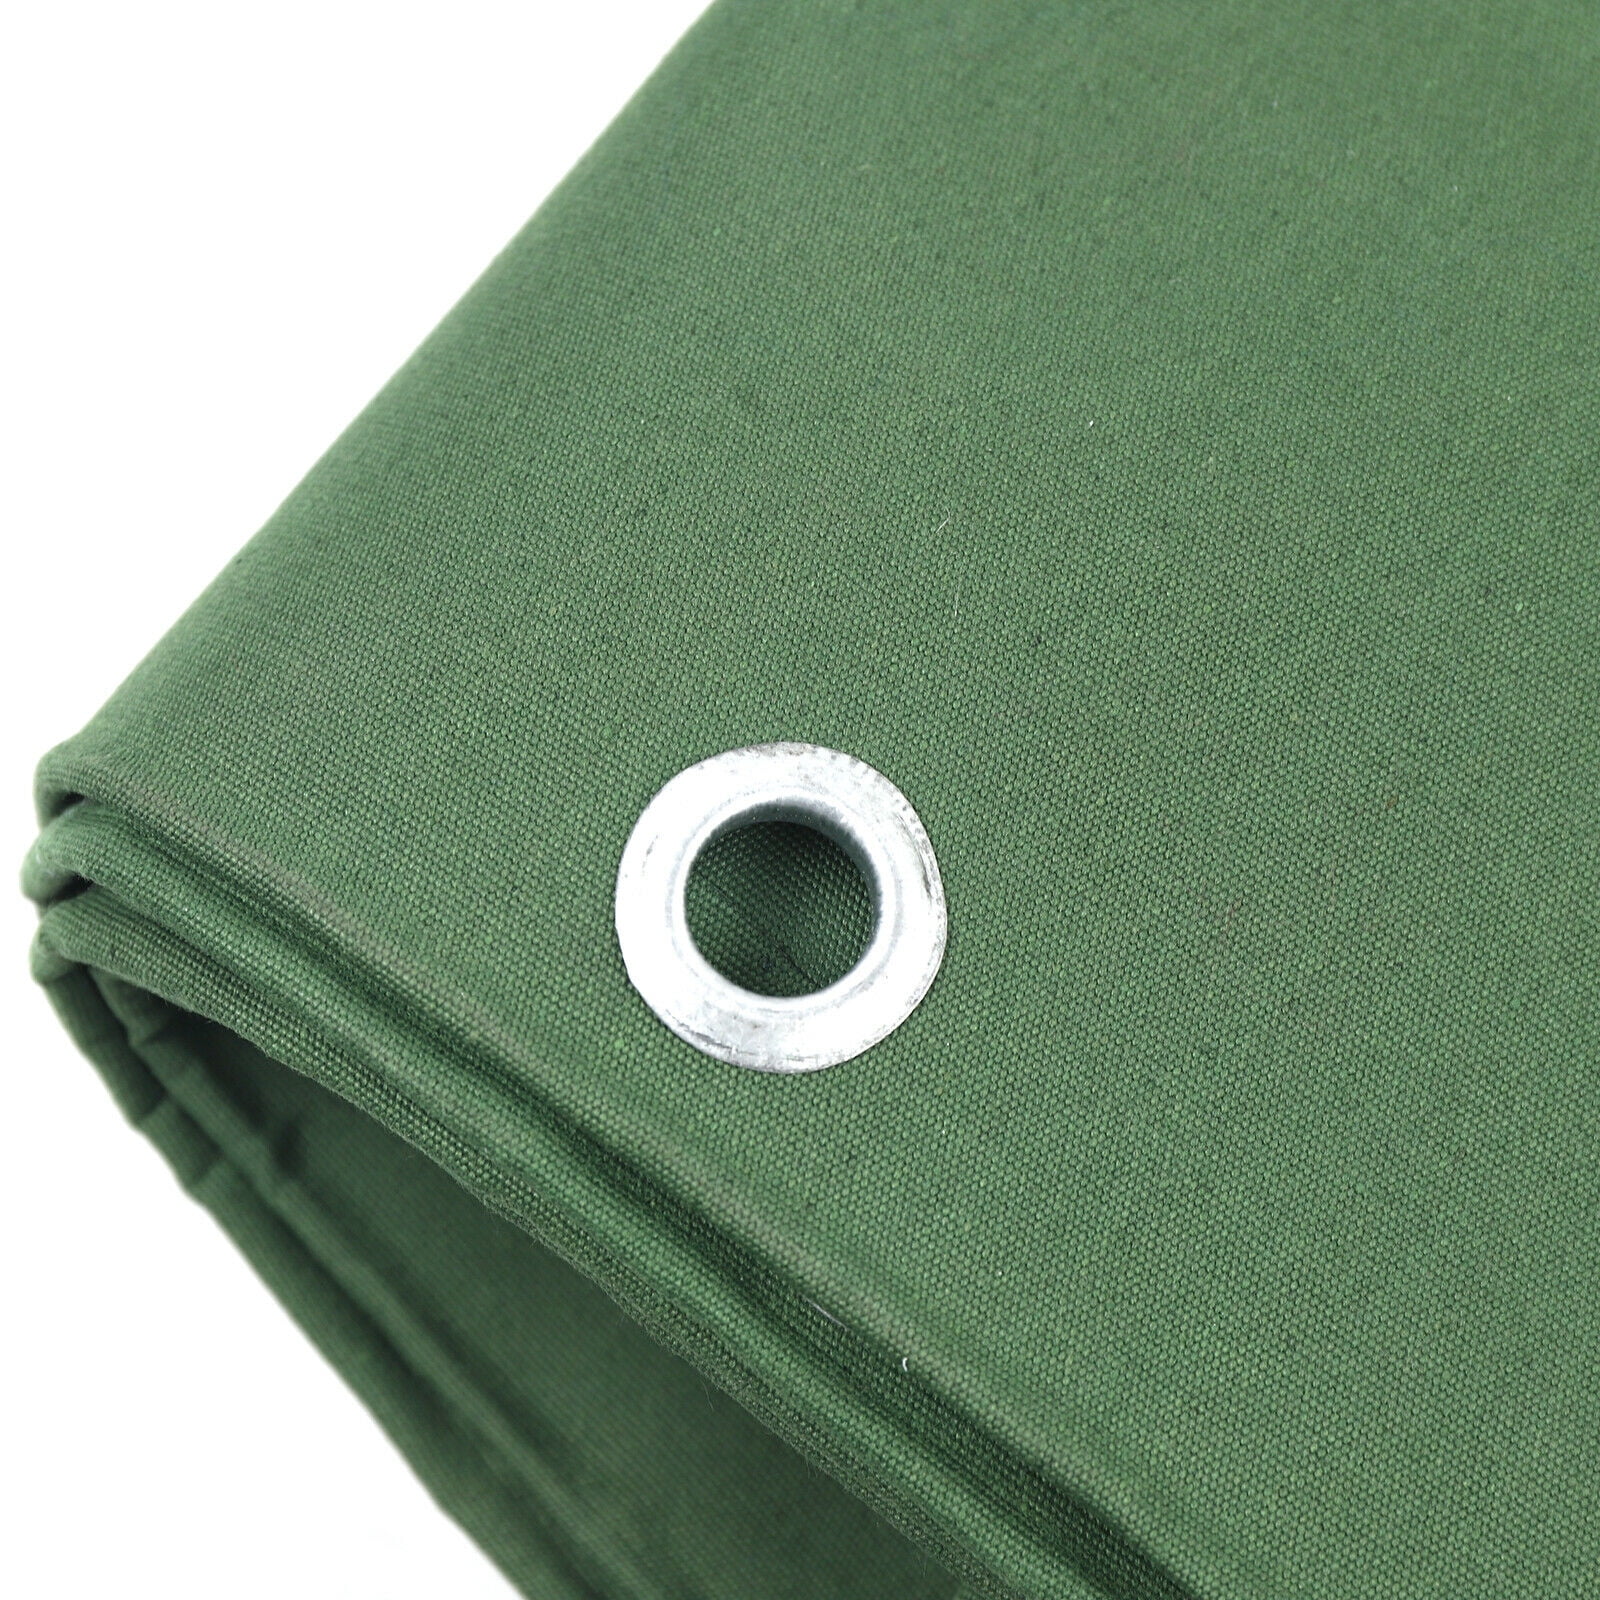 TFCFL Waterproof Canvas Fabric Heavy Duty Thick Outdoor Cover Material 8 x  12ft Green